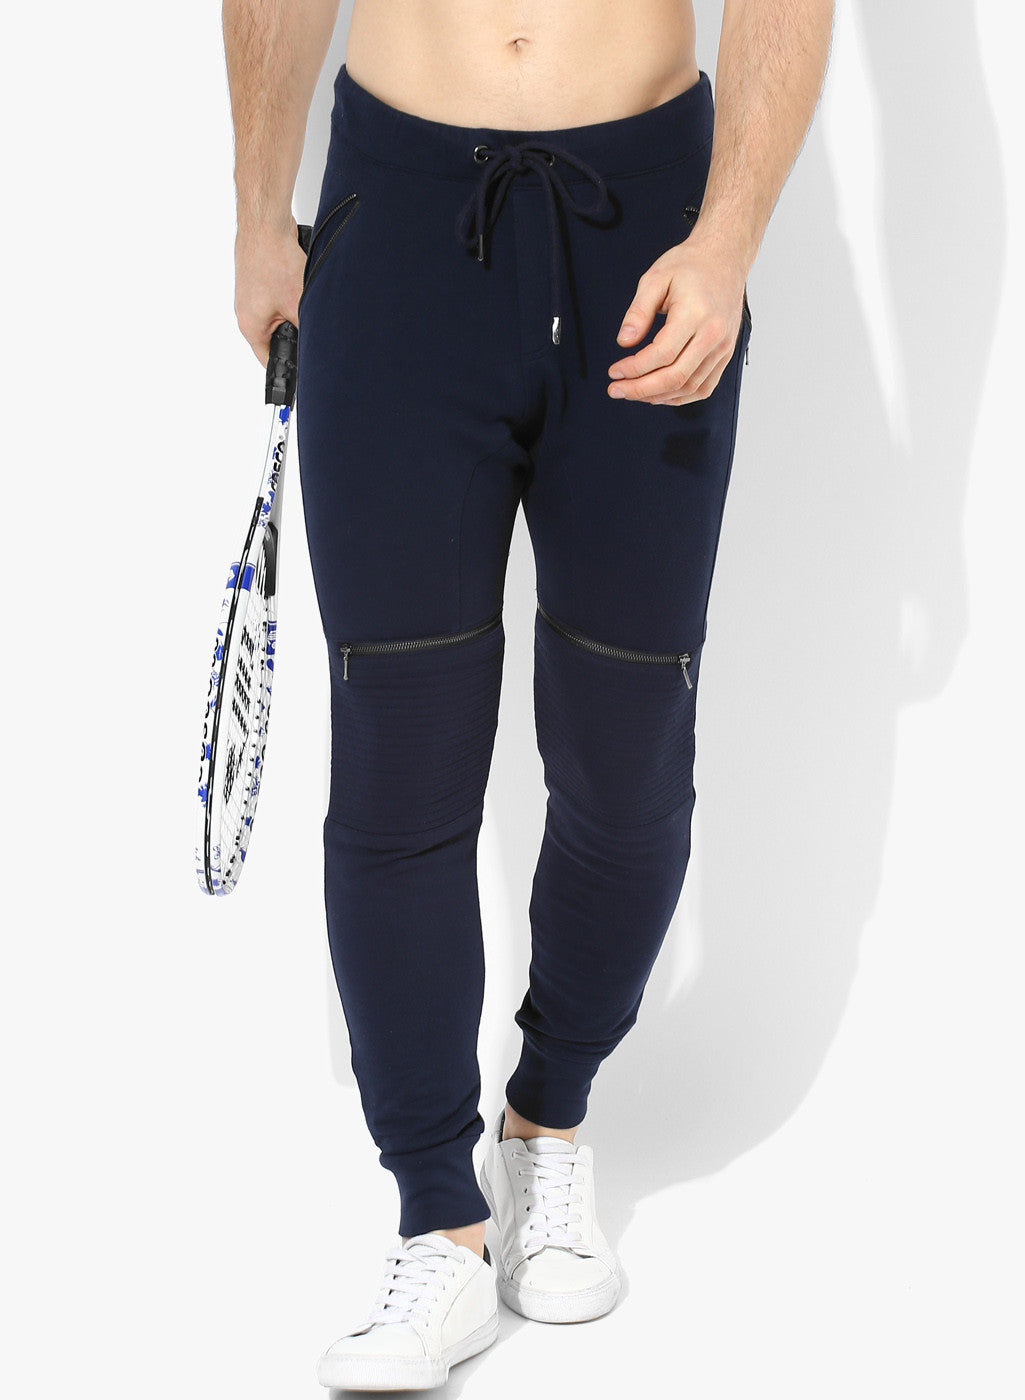 Spiritual Warrior navy joggers for men are both comfortable &amp; high quality. They keep you cool and dry. These navy sweatpants are great for yoga, gym, relaxing